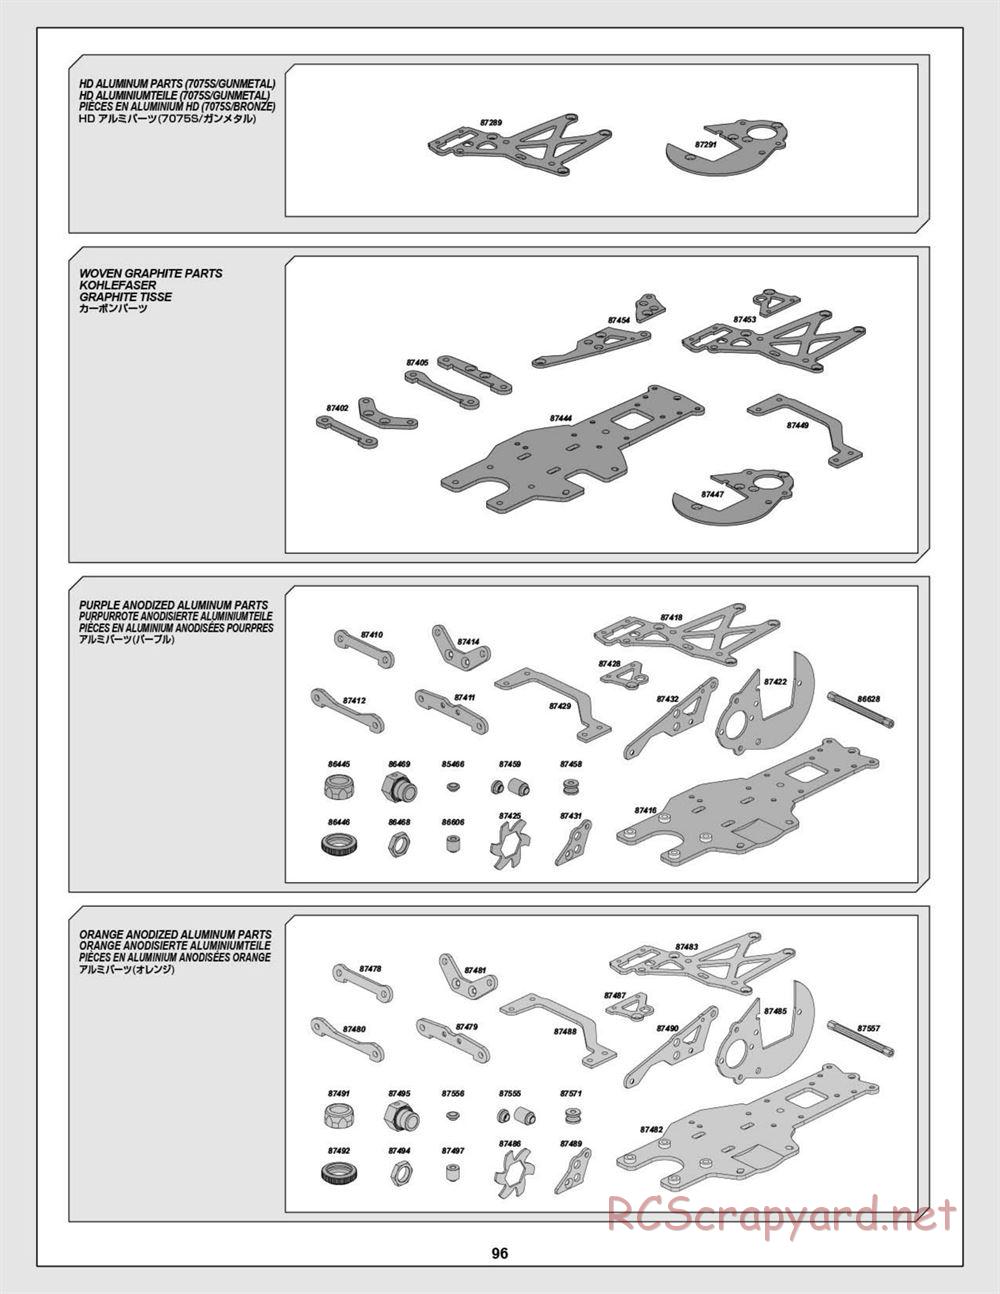 HPI - Baja 5R - Exploded View - Page 96